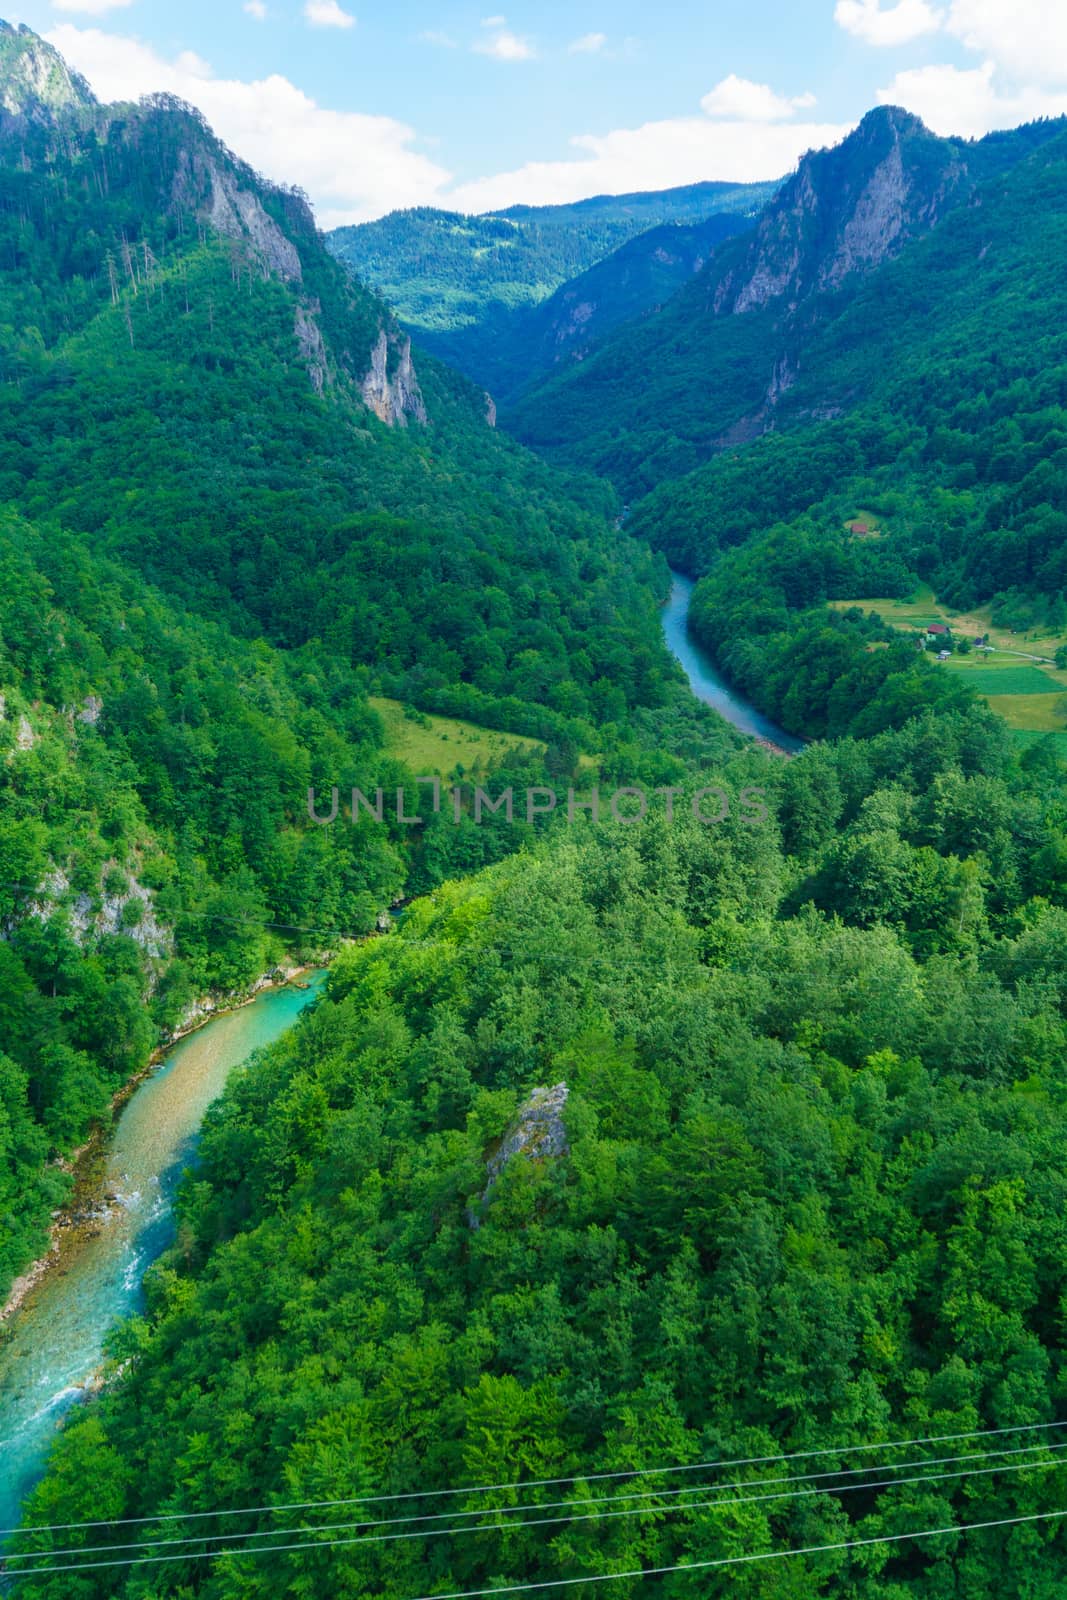 The Tara River and Canyon, and its countryside, in northern Montenegro